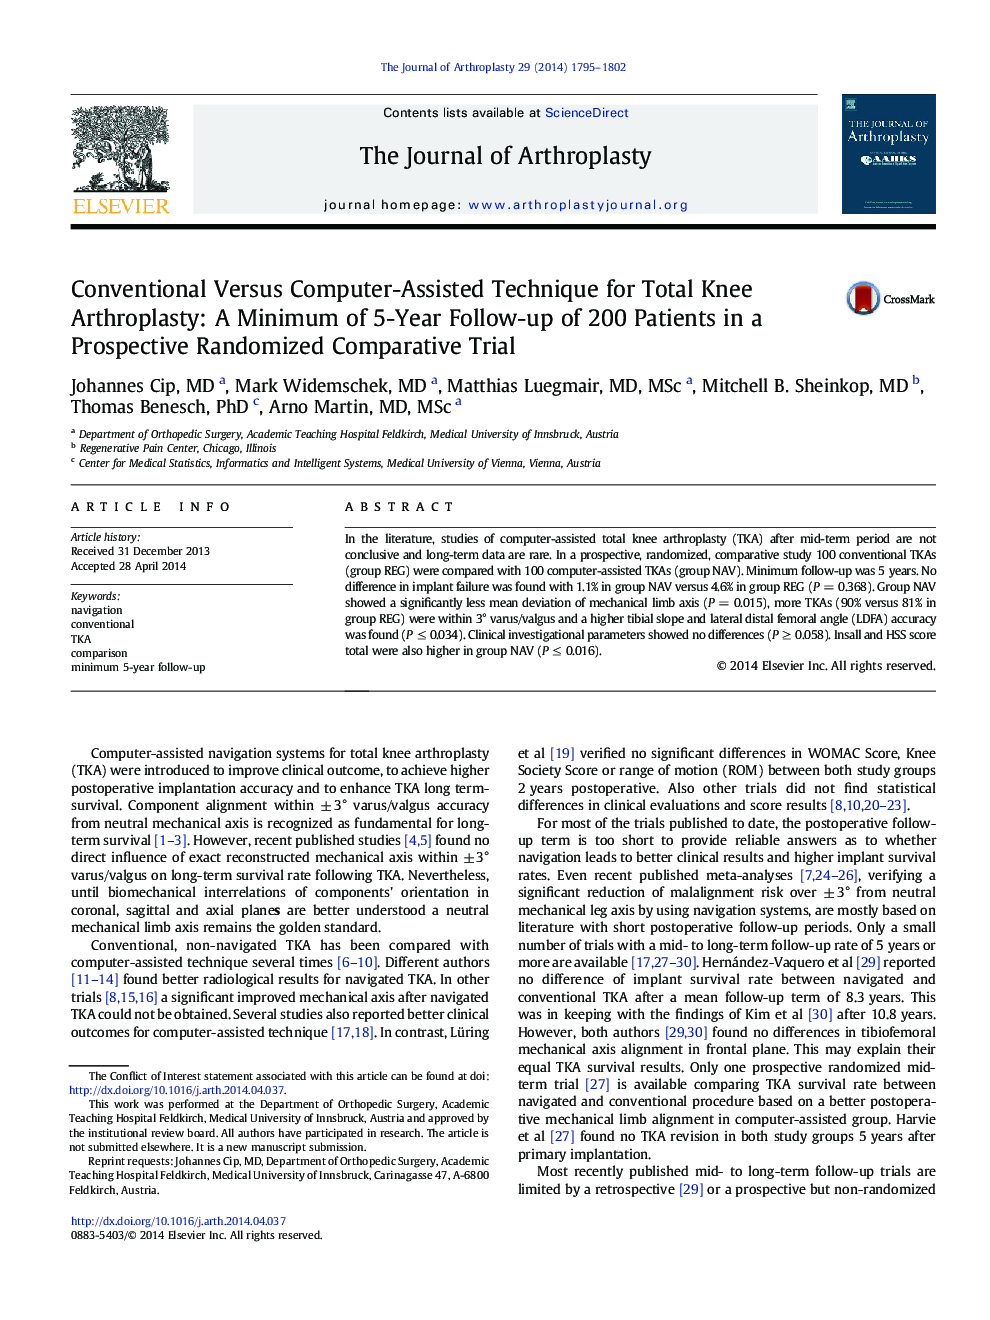 Conventional Versus Computer-Assisted Technique for Total Knee Arthroplasty: A Minimum of 5-Year Follow-up of 200 Patients in a Prospective Randomized Comparative Trial 